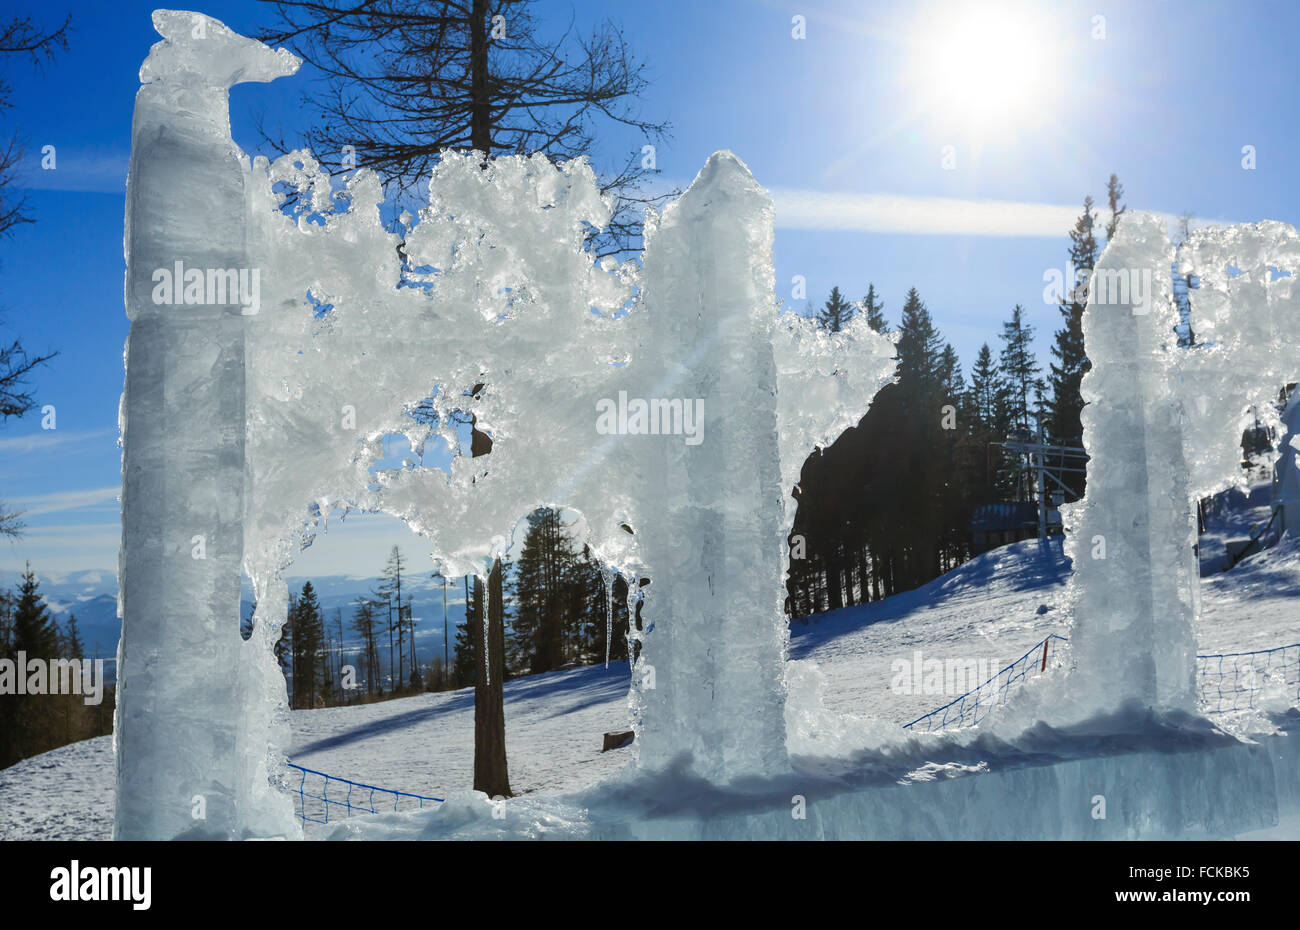 Melting glacial block of ice on spring mountain slope. Stock Photo